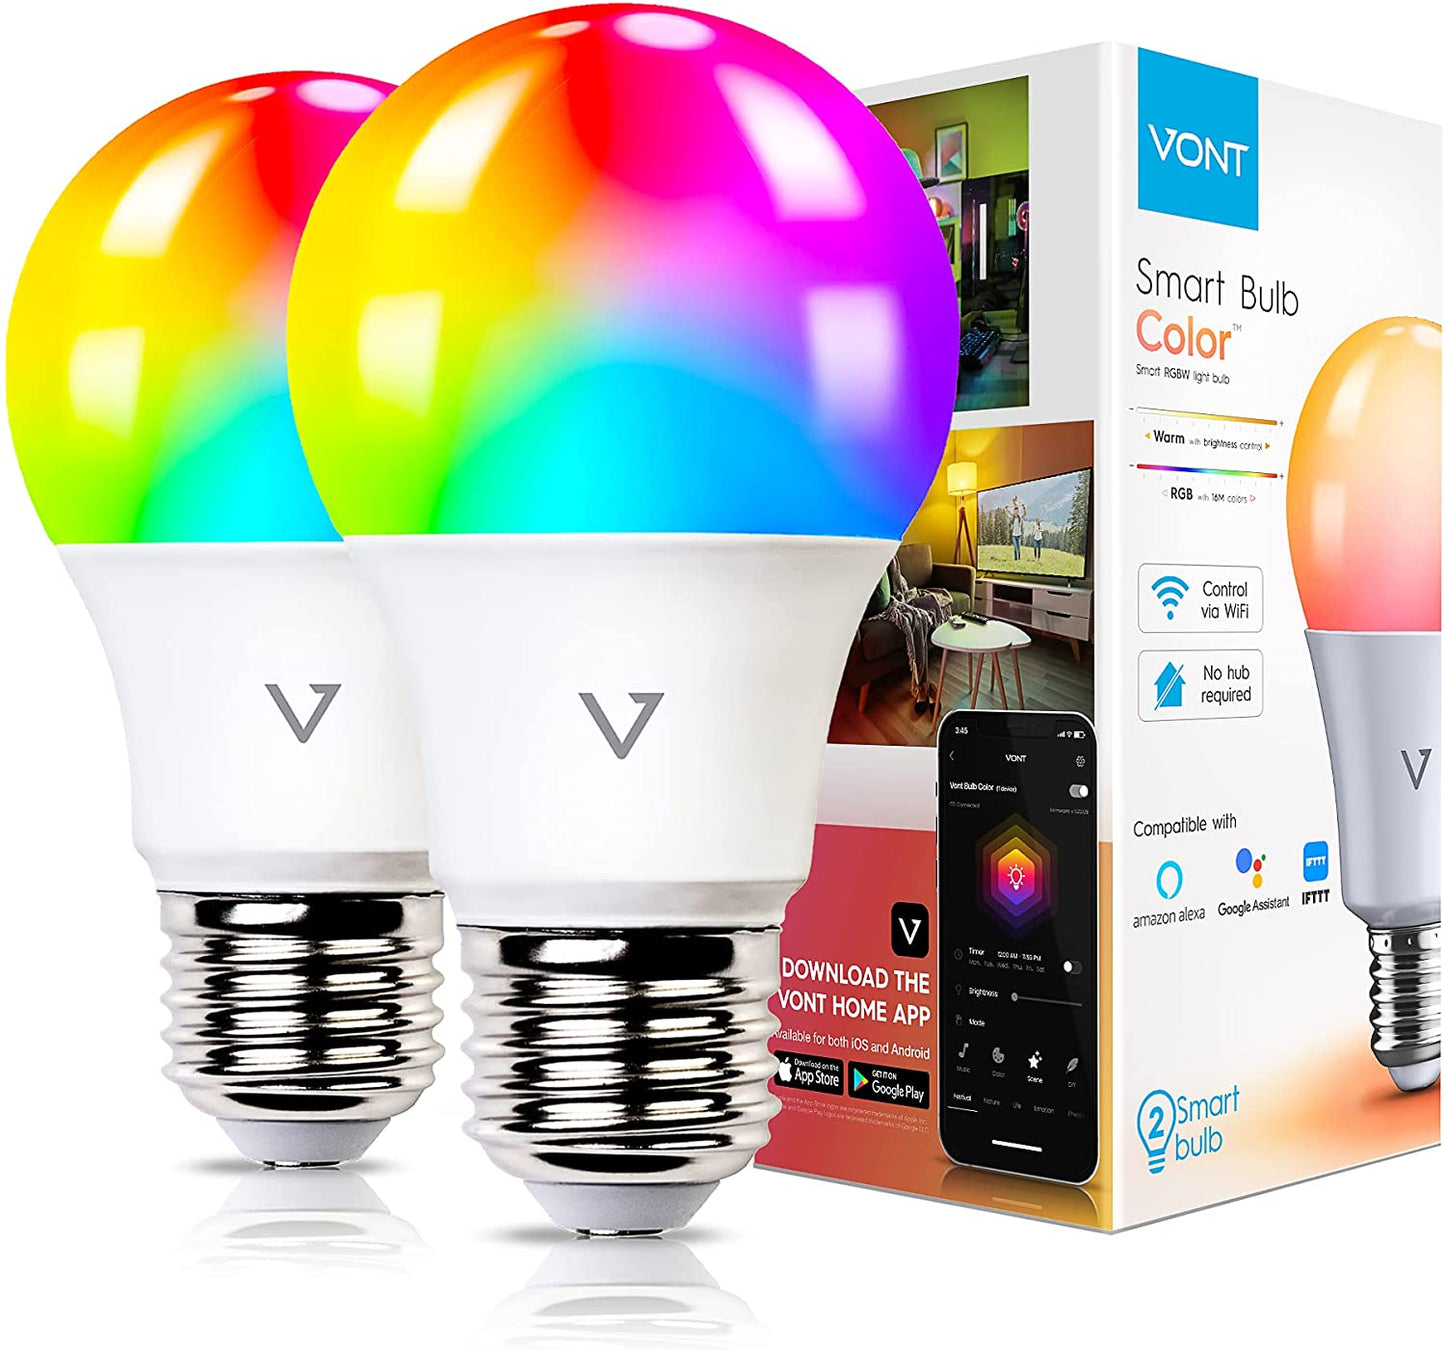 Smart Light Bulbs [4 Pack], WiFi & Bluetooth 5.0, Compatible w/ Alexa & Google w/o Hub, Dimmable, Music Sync, Schedules, Color Changing Light Bulb, RGBW Smart Bulb Lights, LED Bulb, A19/E26, 9W, 810LM